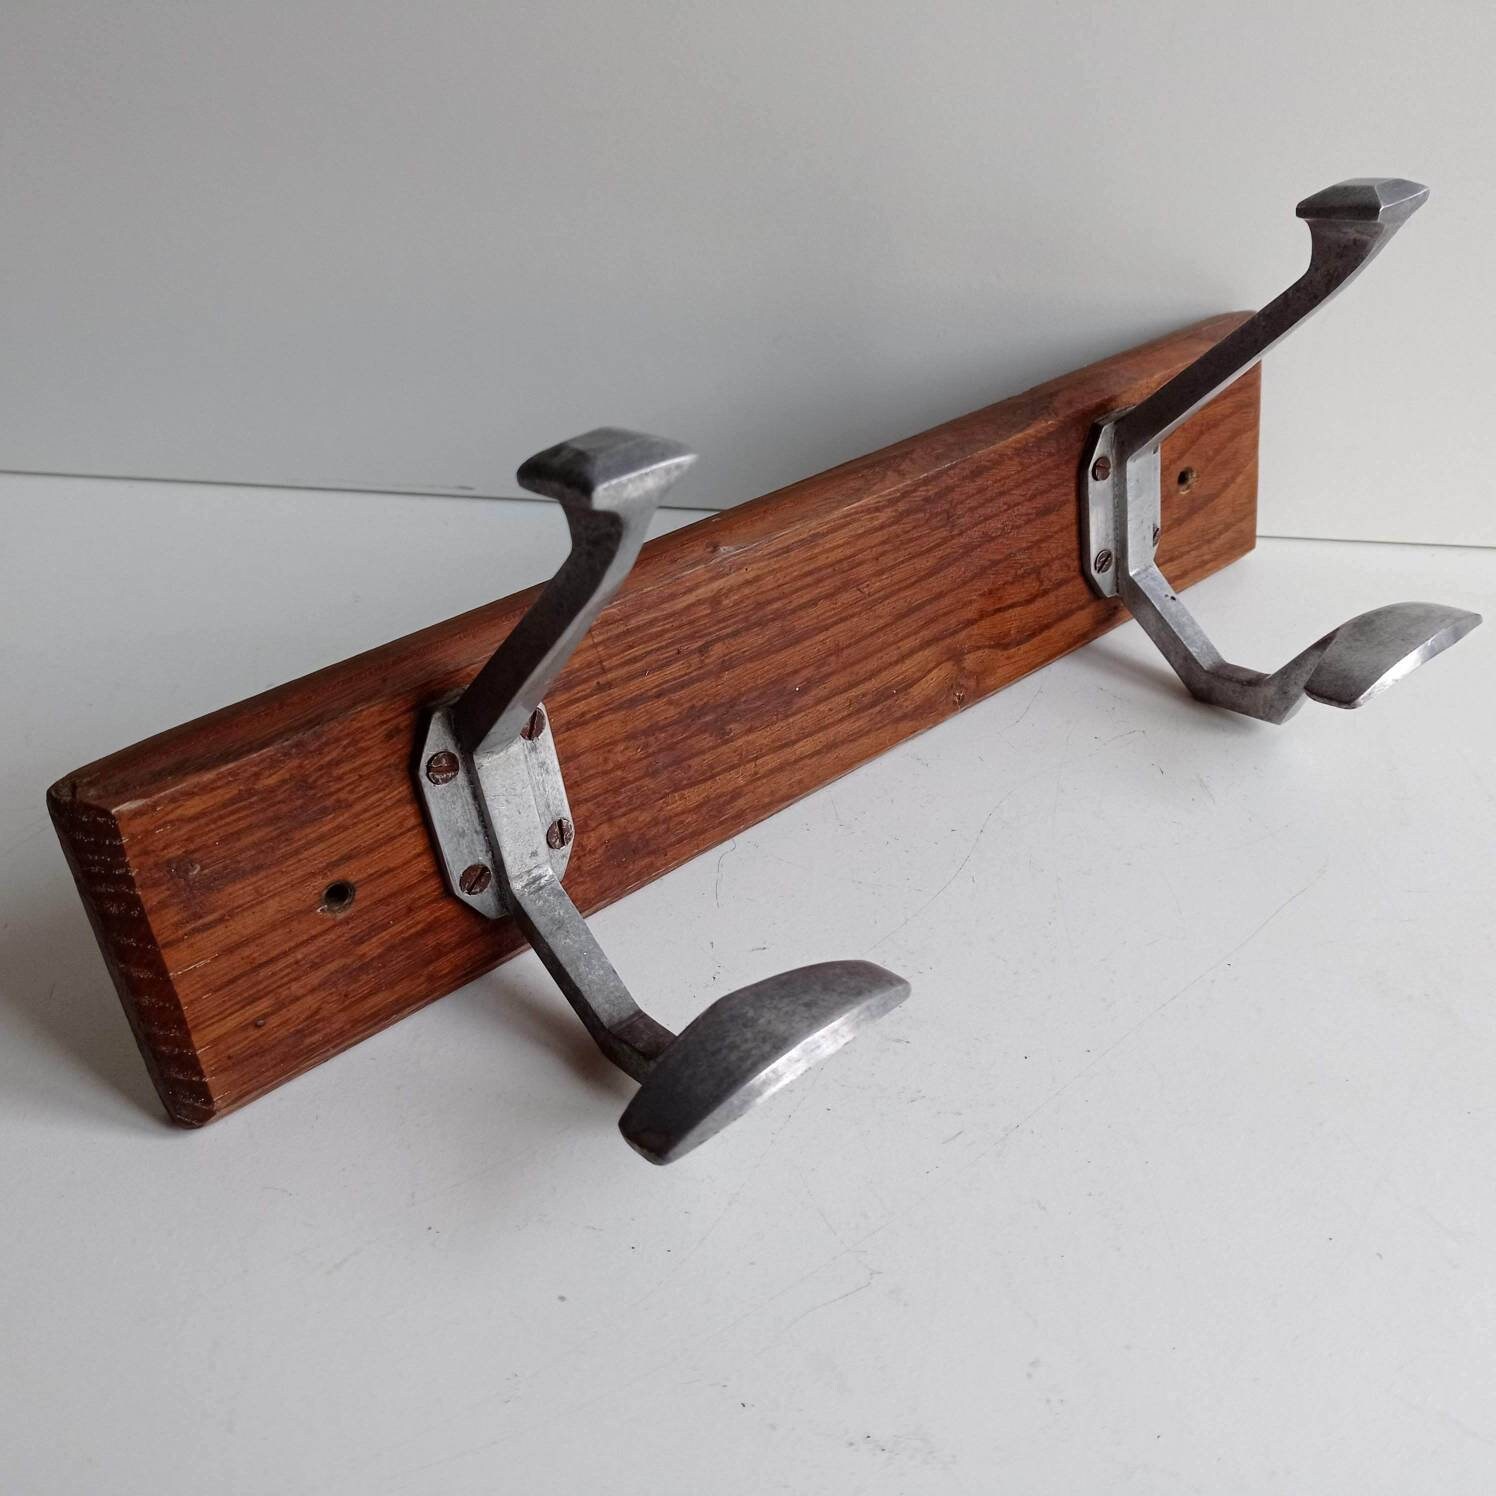 Vintage wood and metal coat and hat peg Handmade coat rack from 1950's